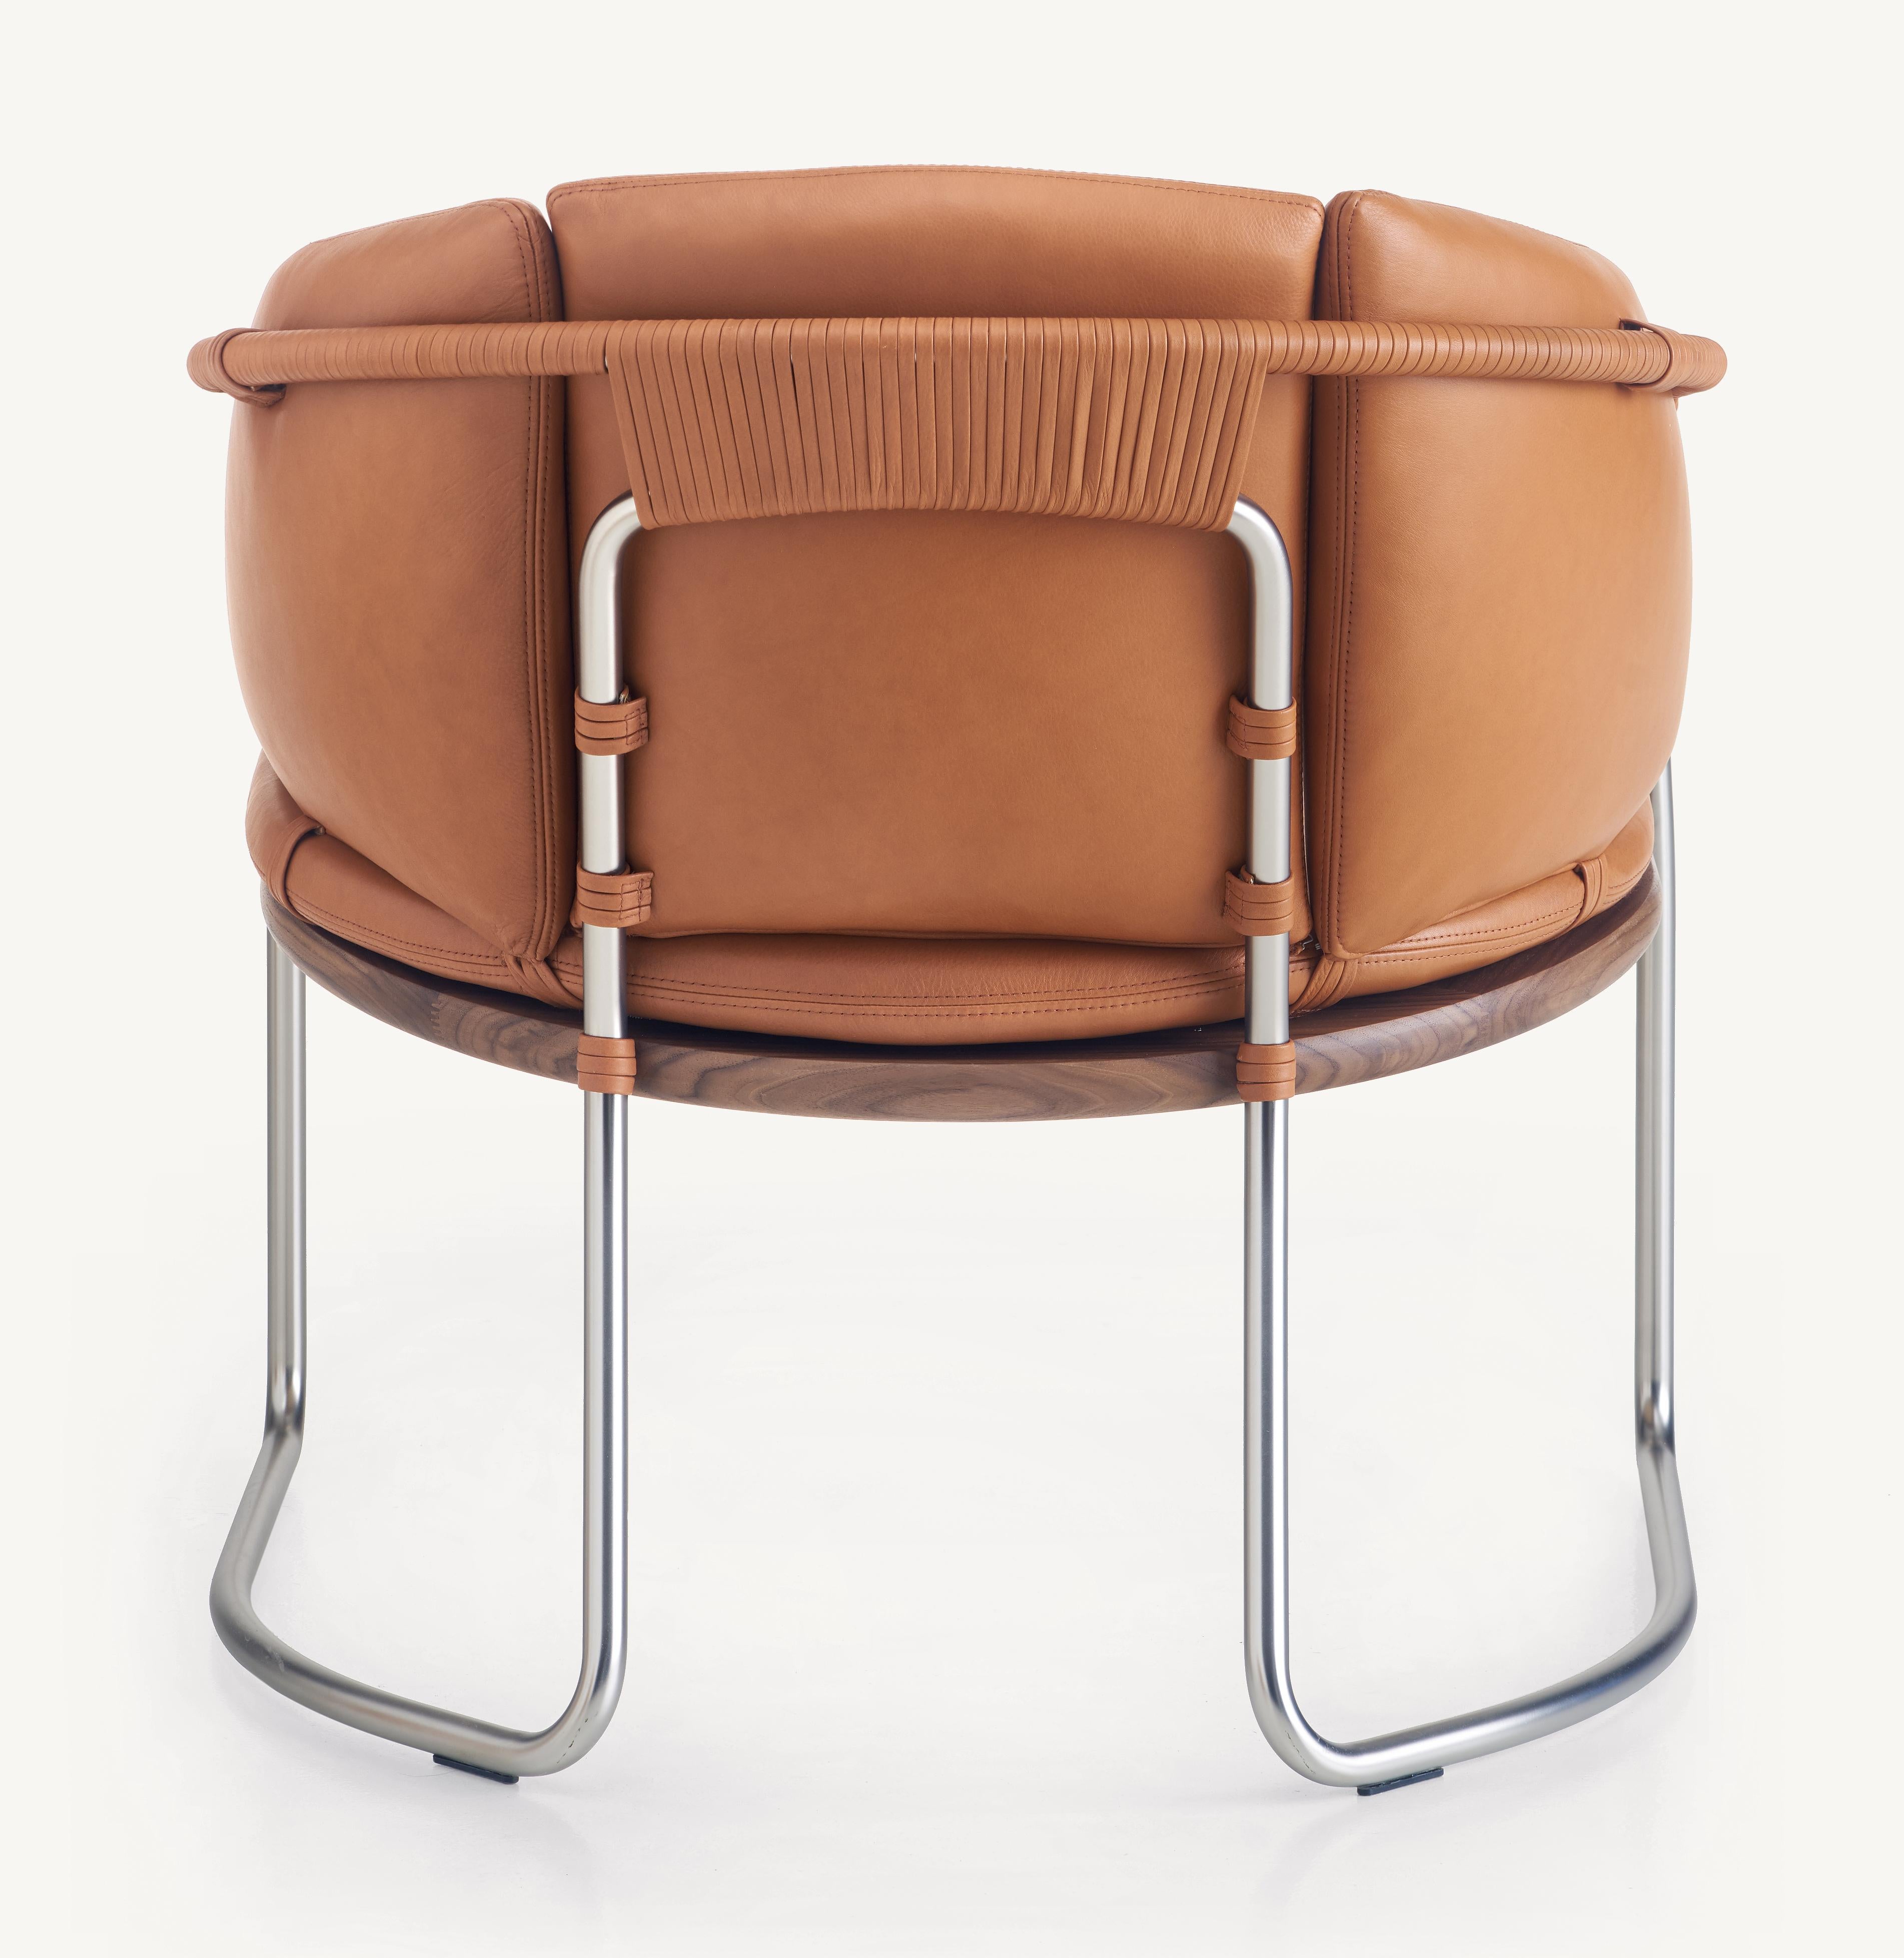 For Sale: Brown (Elegant 43807 British Tan) Geometric Lounge Chair in Walnut, Satin Nickel and Leather by Craig Bassam 4